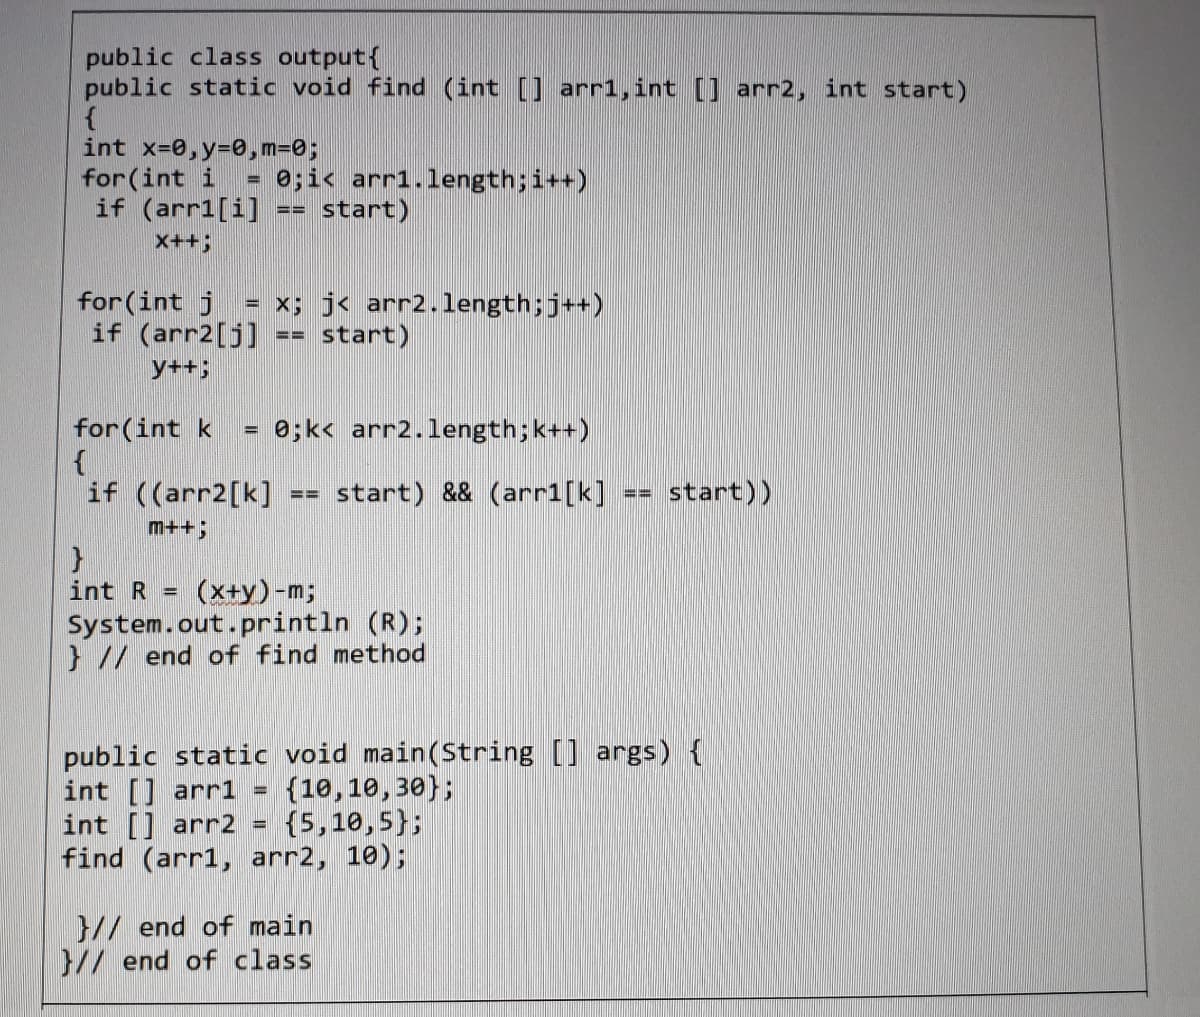 public class output{
public static void find (int [] arr1, int [] arr2, int start)
int x=0,y=0, m=0;
for (int i
if (arr1[i]
0;ic arr1.length;i++)
start)
%3D
==
x++3;
for(int j
if (arr2[j]
= x; j< arr2.length;j++)
== start)
y++;
for(int k
0;k< arr2.length;k++)
if ((arr2[k]
start) && (arr1[k]
start))
m++3;
int R = (x+y)-m;
System.out.println (R);
} // end of find method
public static void main(String [] args) {
int [] arr1
int [] arr2 =
find (arr1, arr2, 10);
{10,10,30};
{5,10,5};
}// end of main
}// end of class
